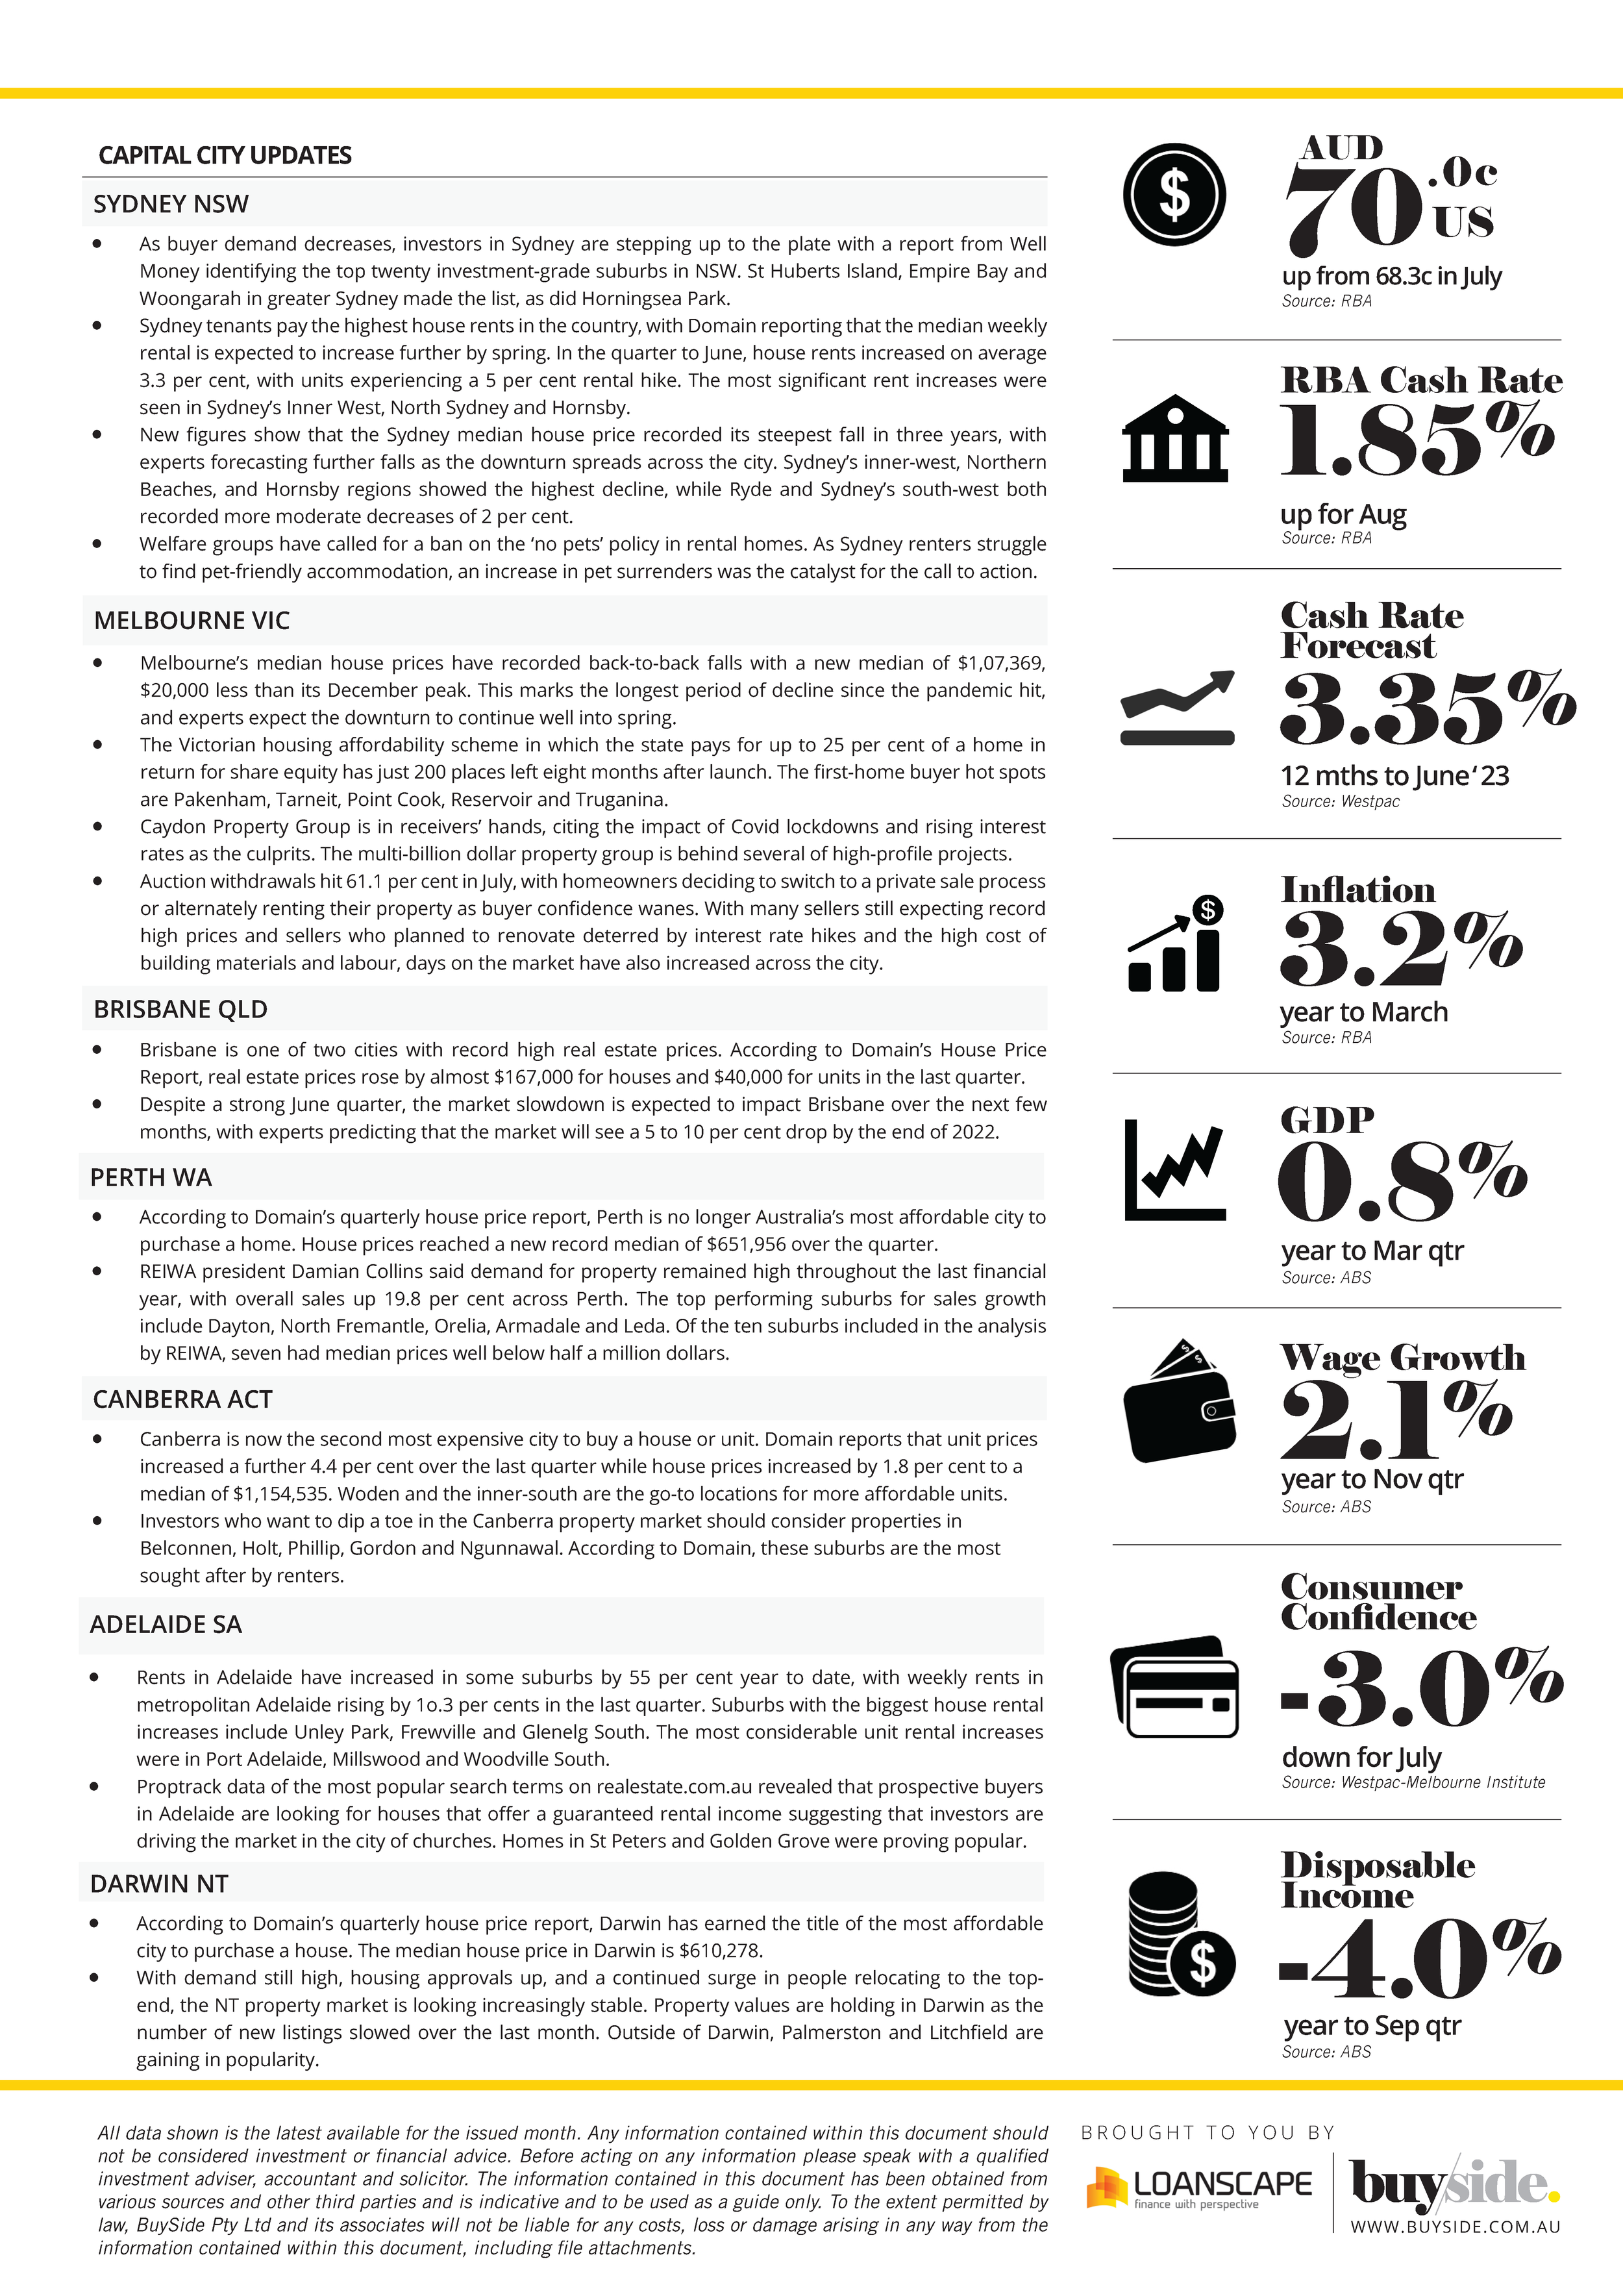 Market Essentials Report_LS_Aug_2022_Page_2.png